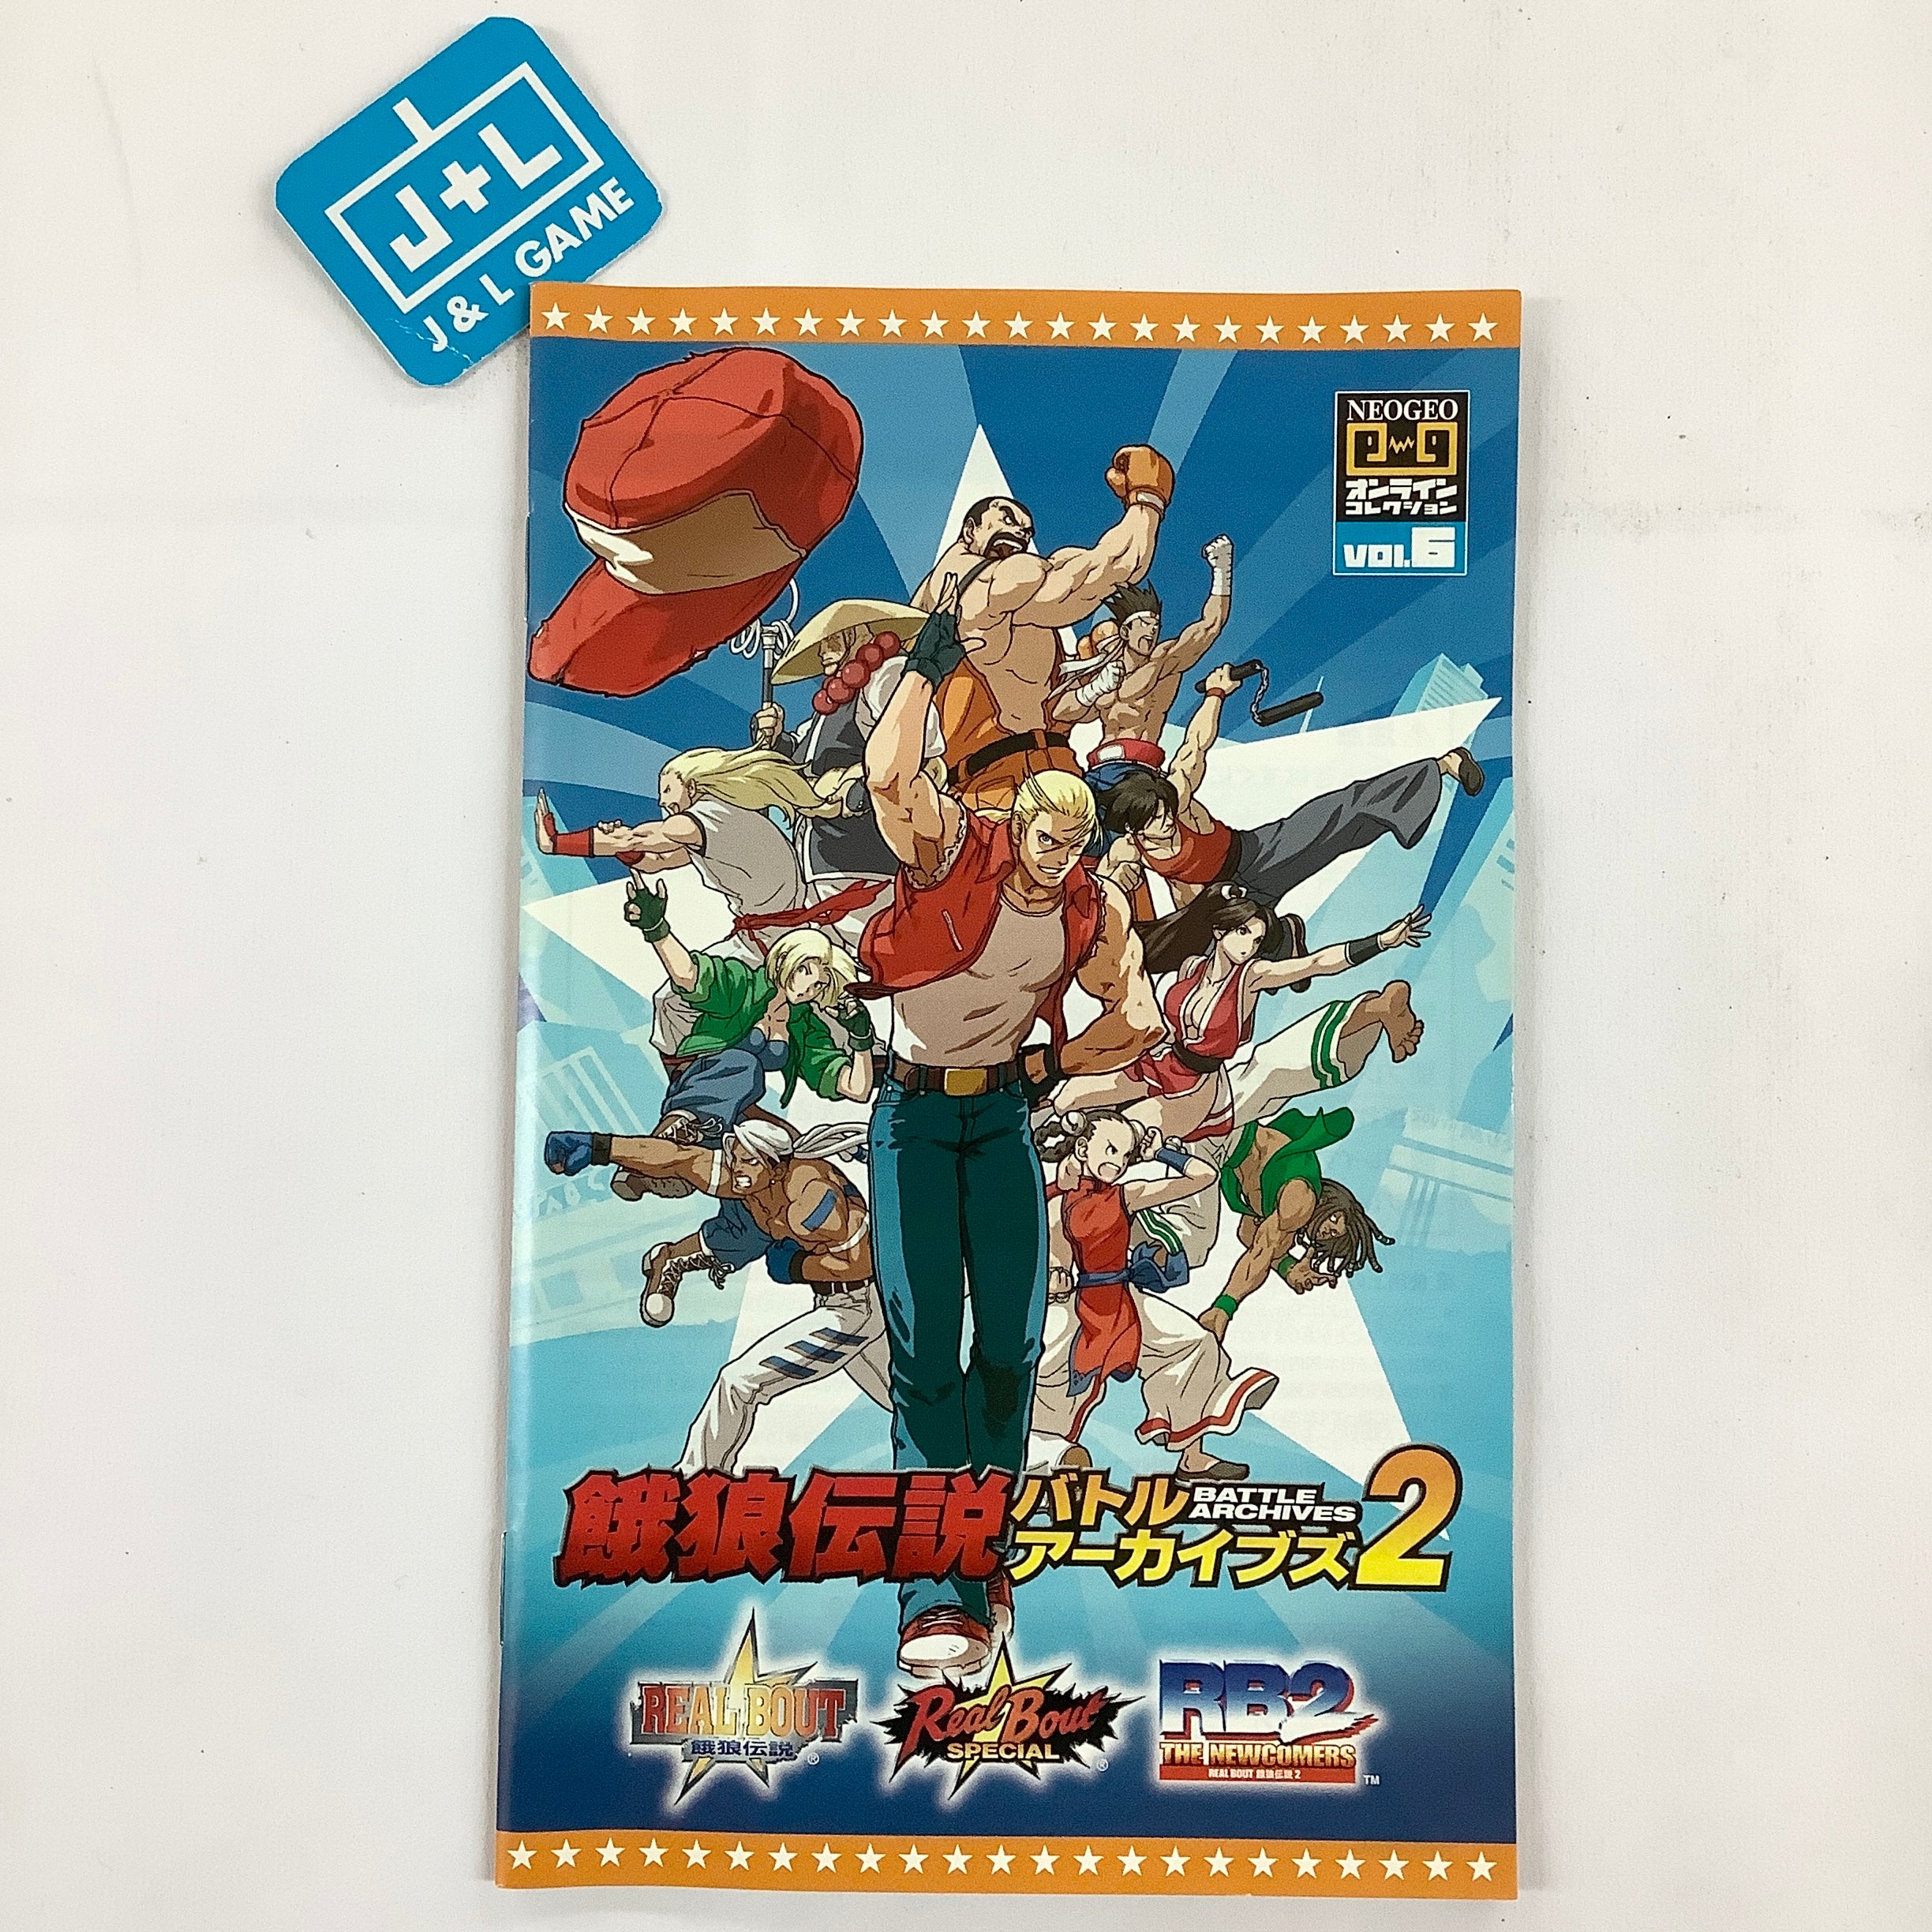 Garou Densetsu Battle Archive 2 (NeoGeo Online Collection Vol. 6) - (PS2) PlayStation 2 [Pre-Owned] (Japanese Import) Video Games SNK Playmore   